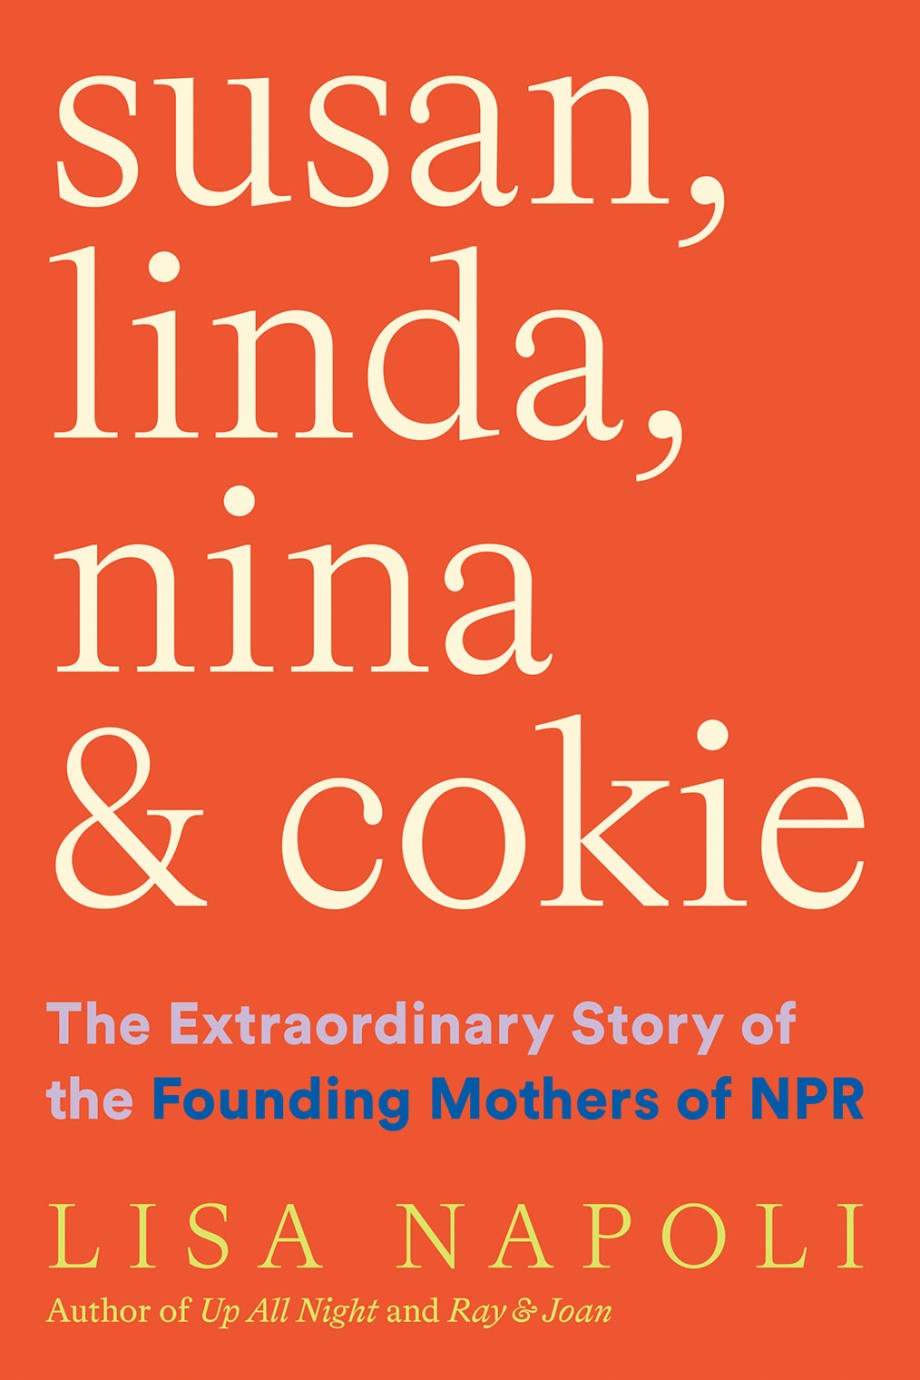 Susan, Linda, Nina & Cokie The Extraordinary Story of the Founding Mothers of NPR